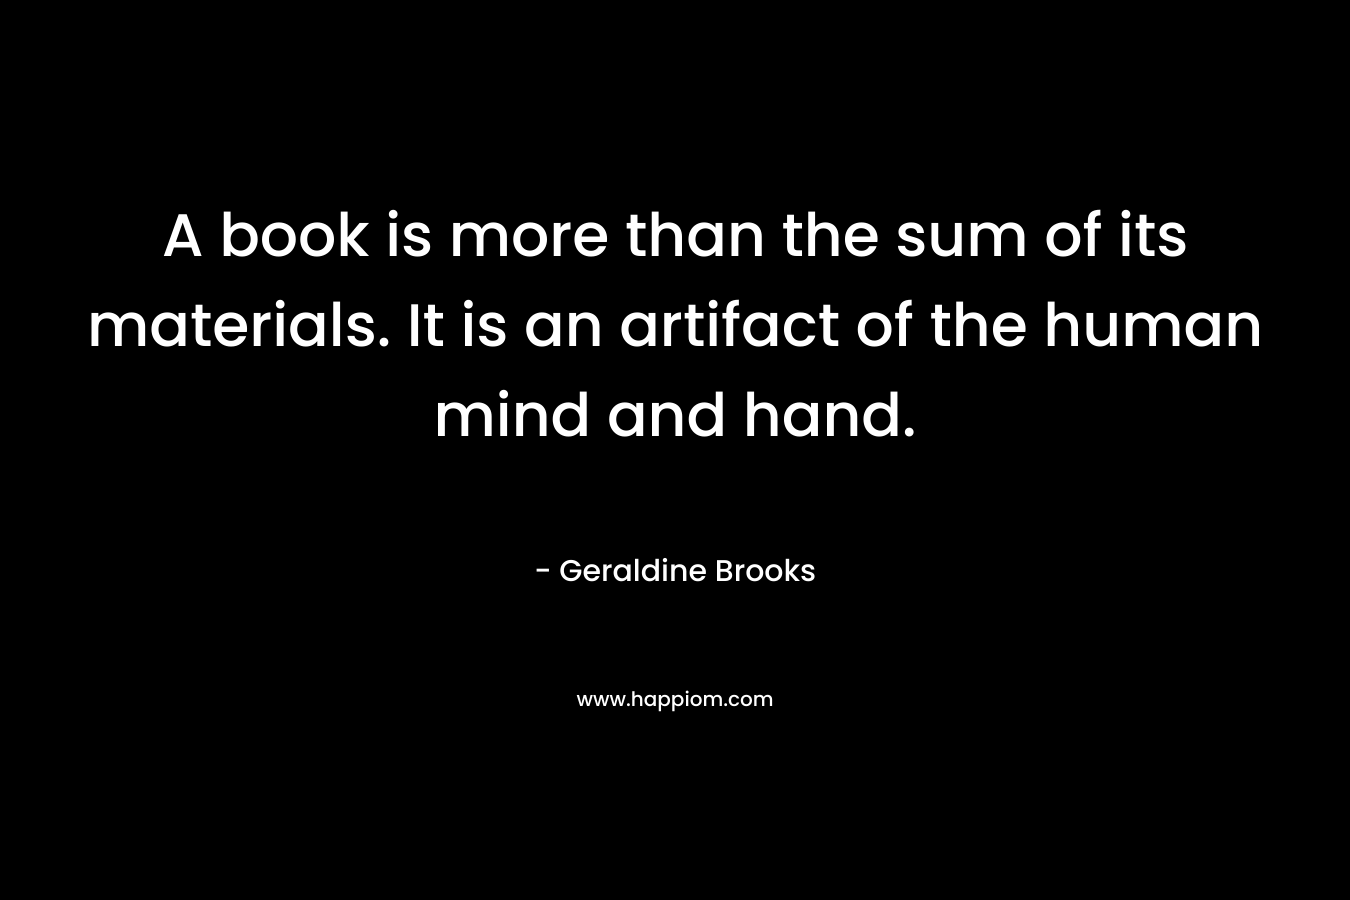 A book is more than the sum of its materials. It is an artifact of the human mind and hand. – Geraldine Brooks